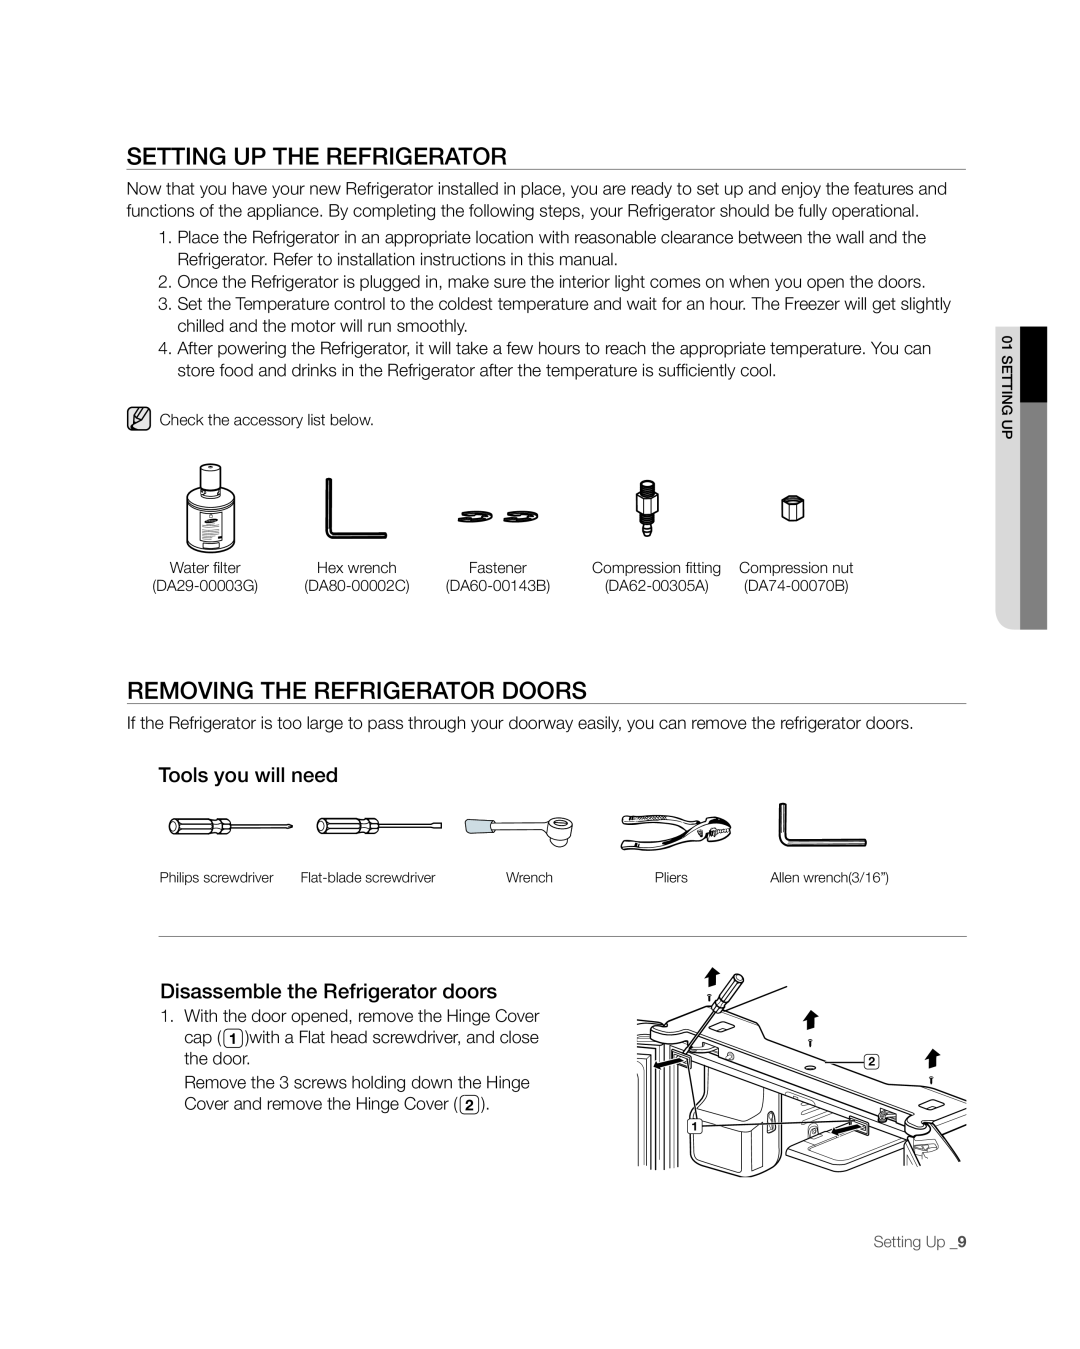 Samsung RFG297AAWP user manual setting uP tHe ReFRigeRAtoR, Removing the refrigerator doors, Tools you will need 